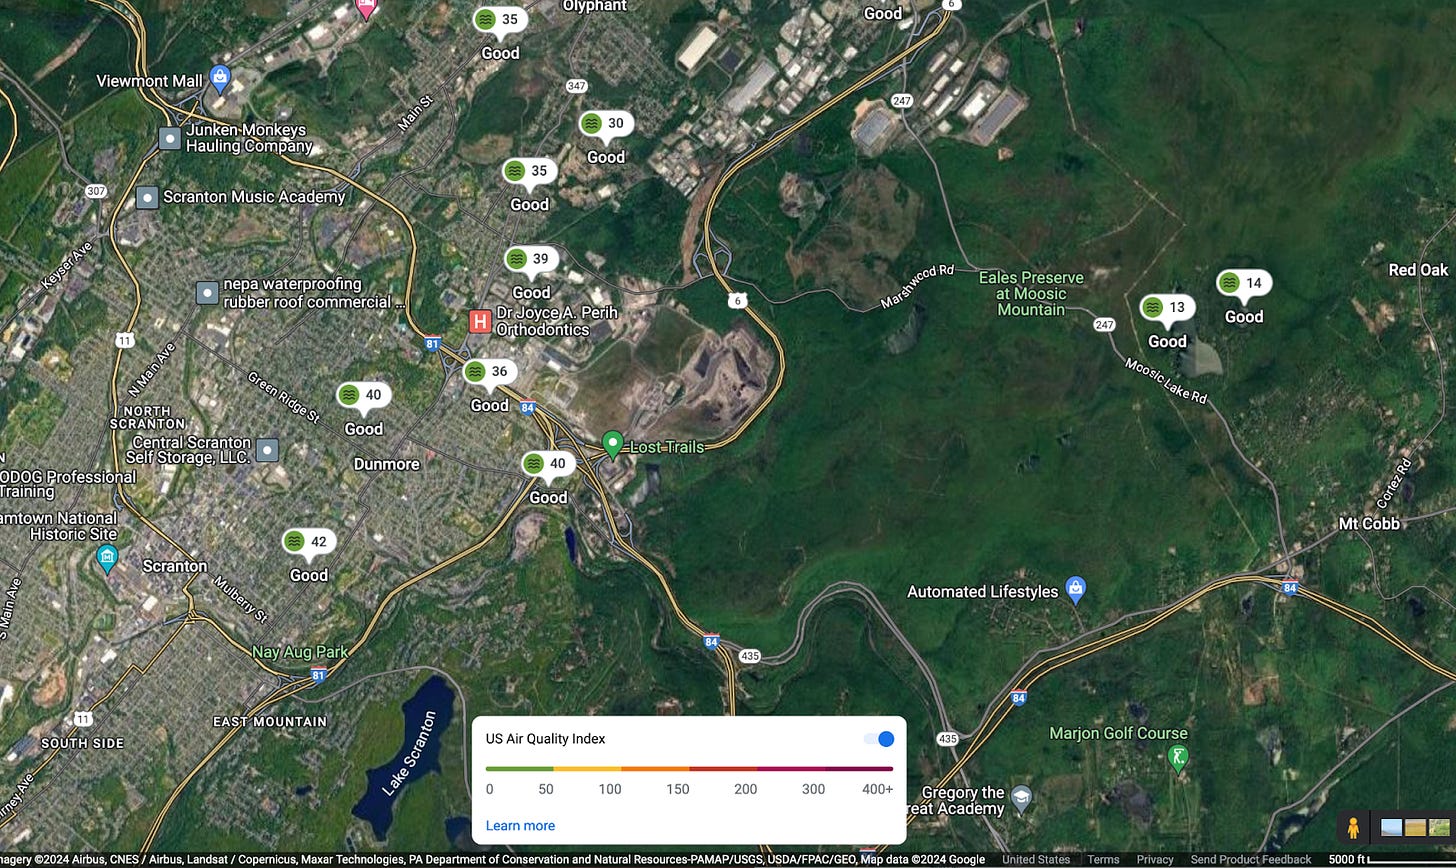 Google maps showing satellite view of Scranton, Dunmore, and Throop, on the west side of the image, including the Keystone Landfill at the center with The Casey Highway / Route 6 rounding about the garbage dump on the east side, and the forests and highways to Mt Cobb on the east side of the map. The map has air quality monitors ranging in the 30s AQI in the valley and in the teens to the east toward the Poconos.